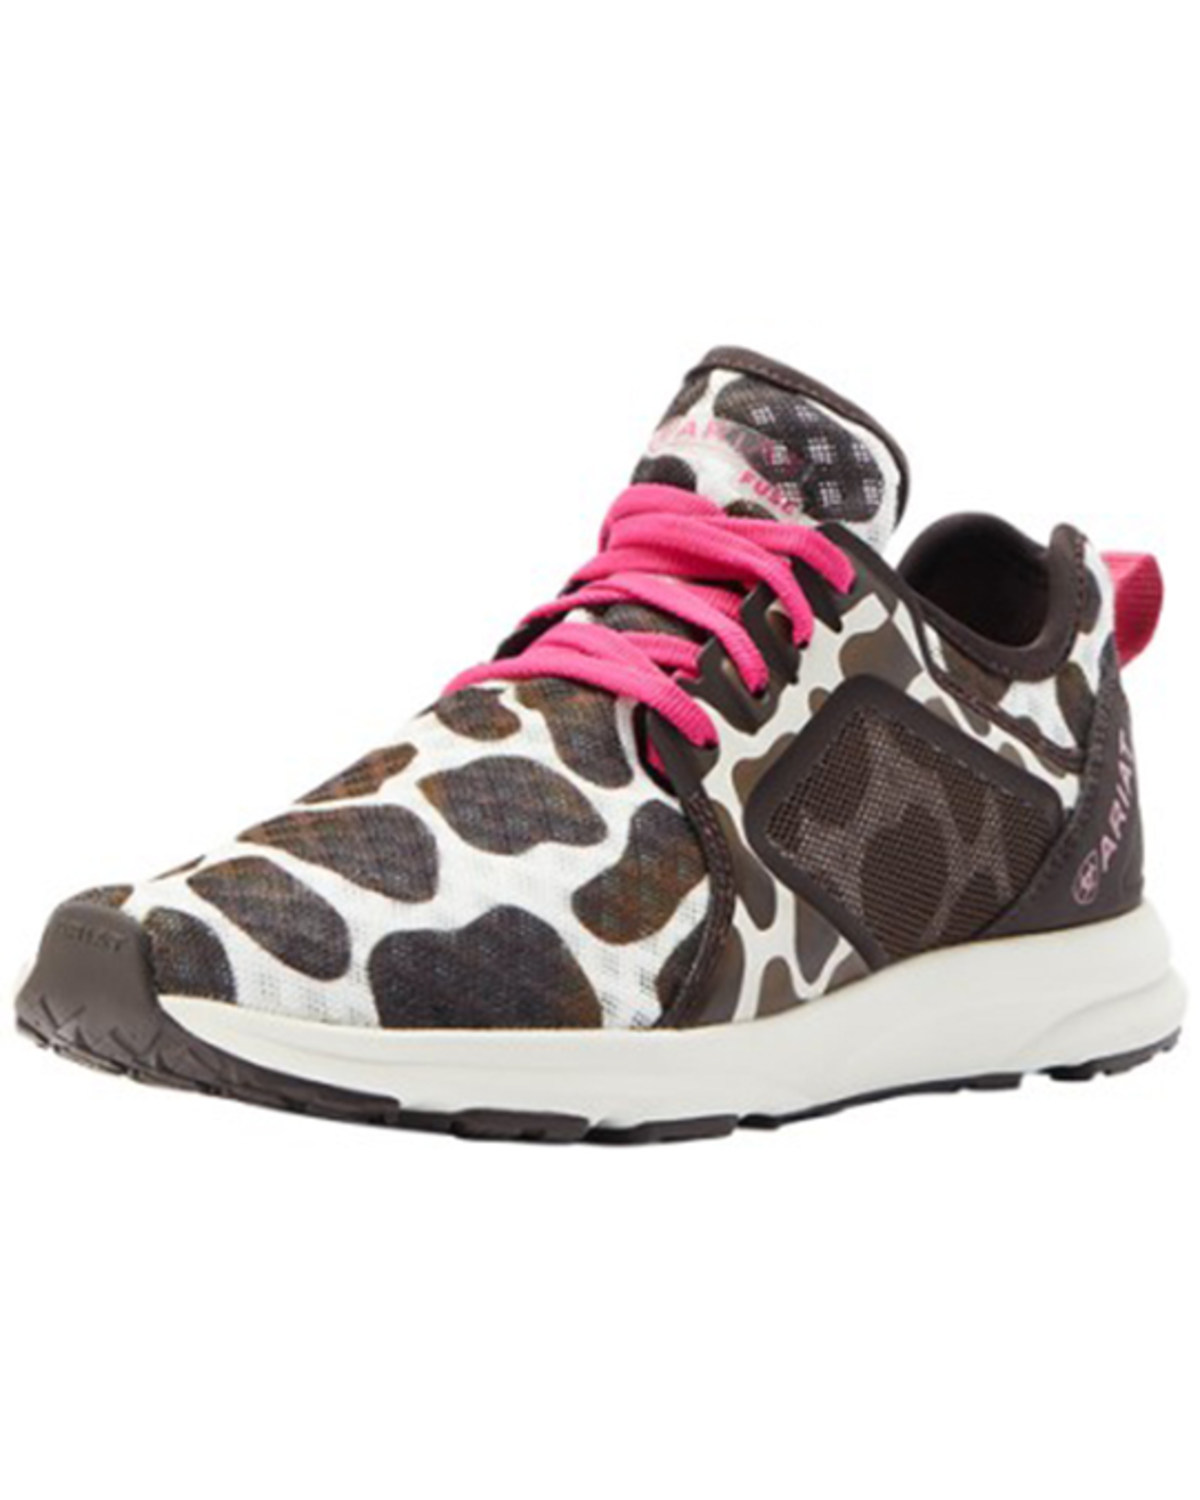 Ariat Women's Cow Print Fuse Sneakers